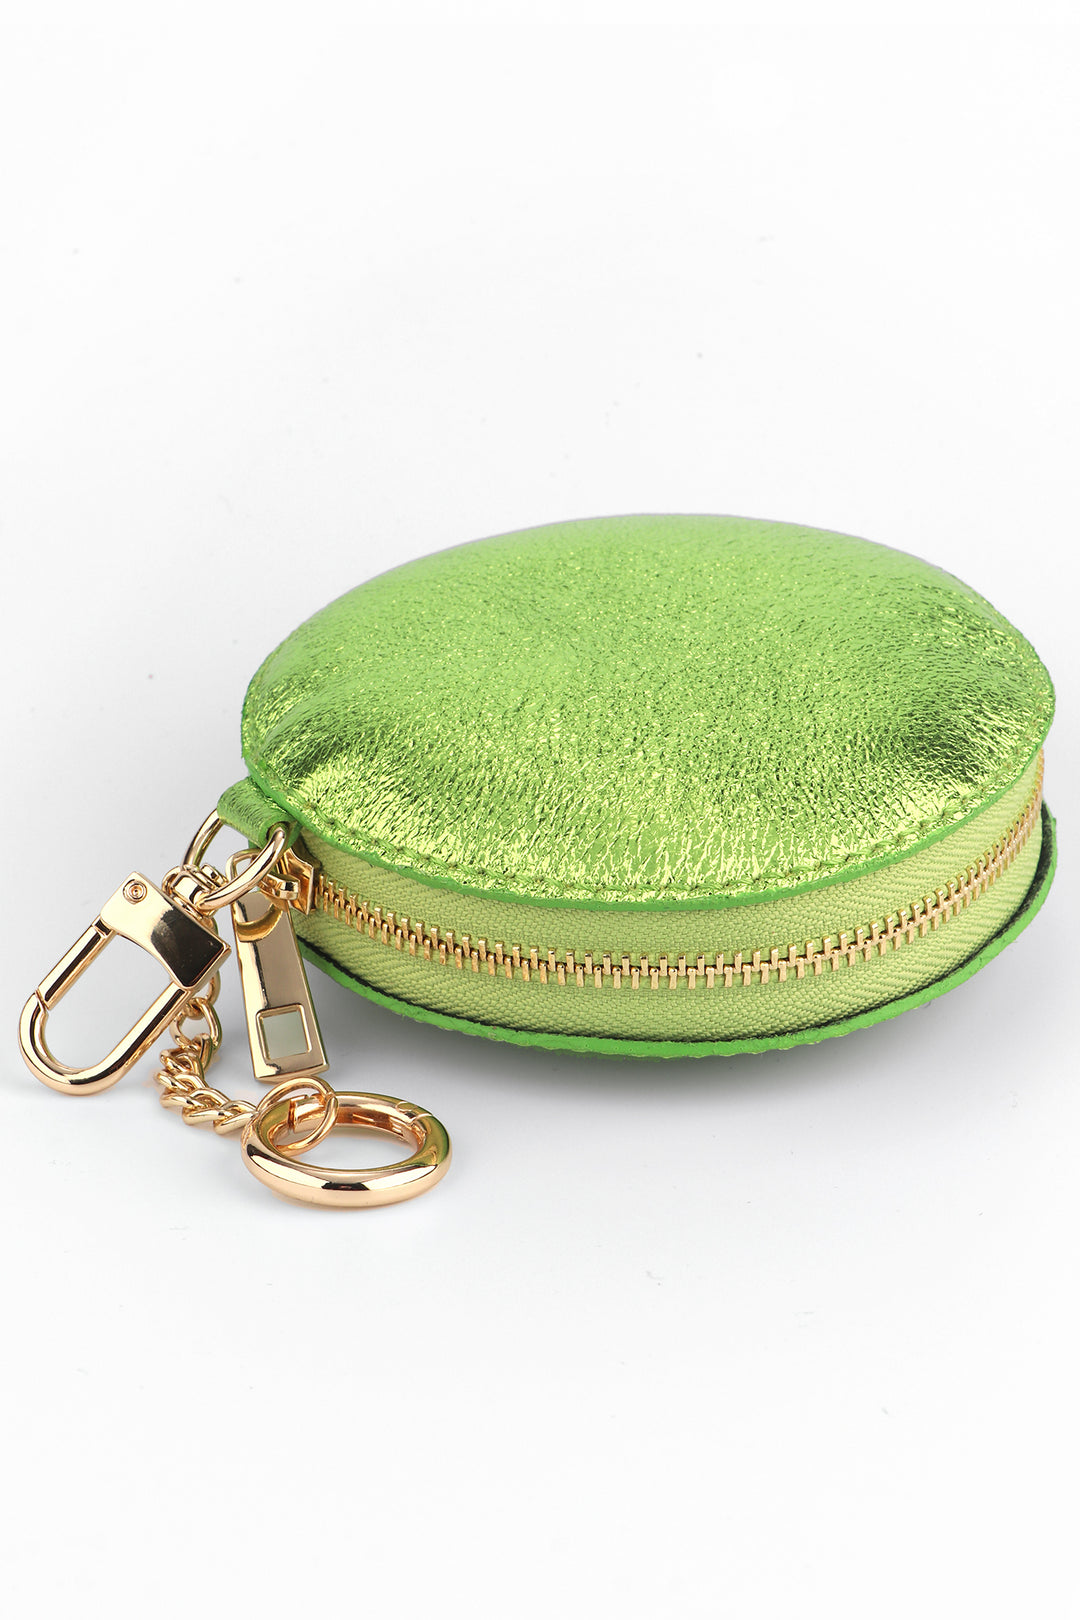 lime green leather coin purse with gold clip on attachements